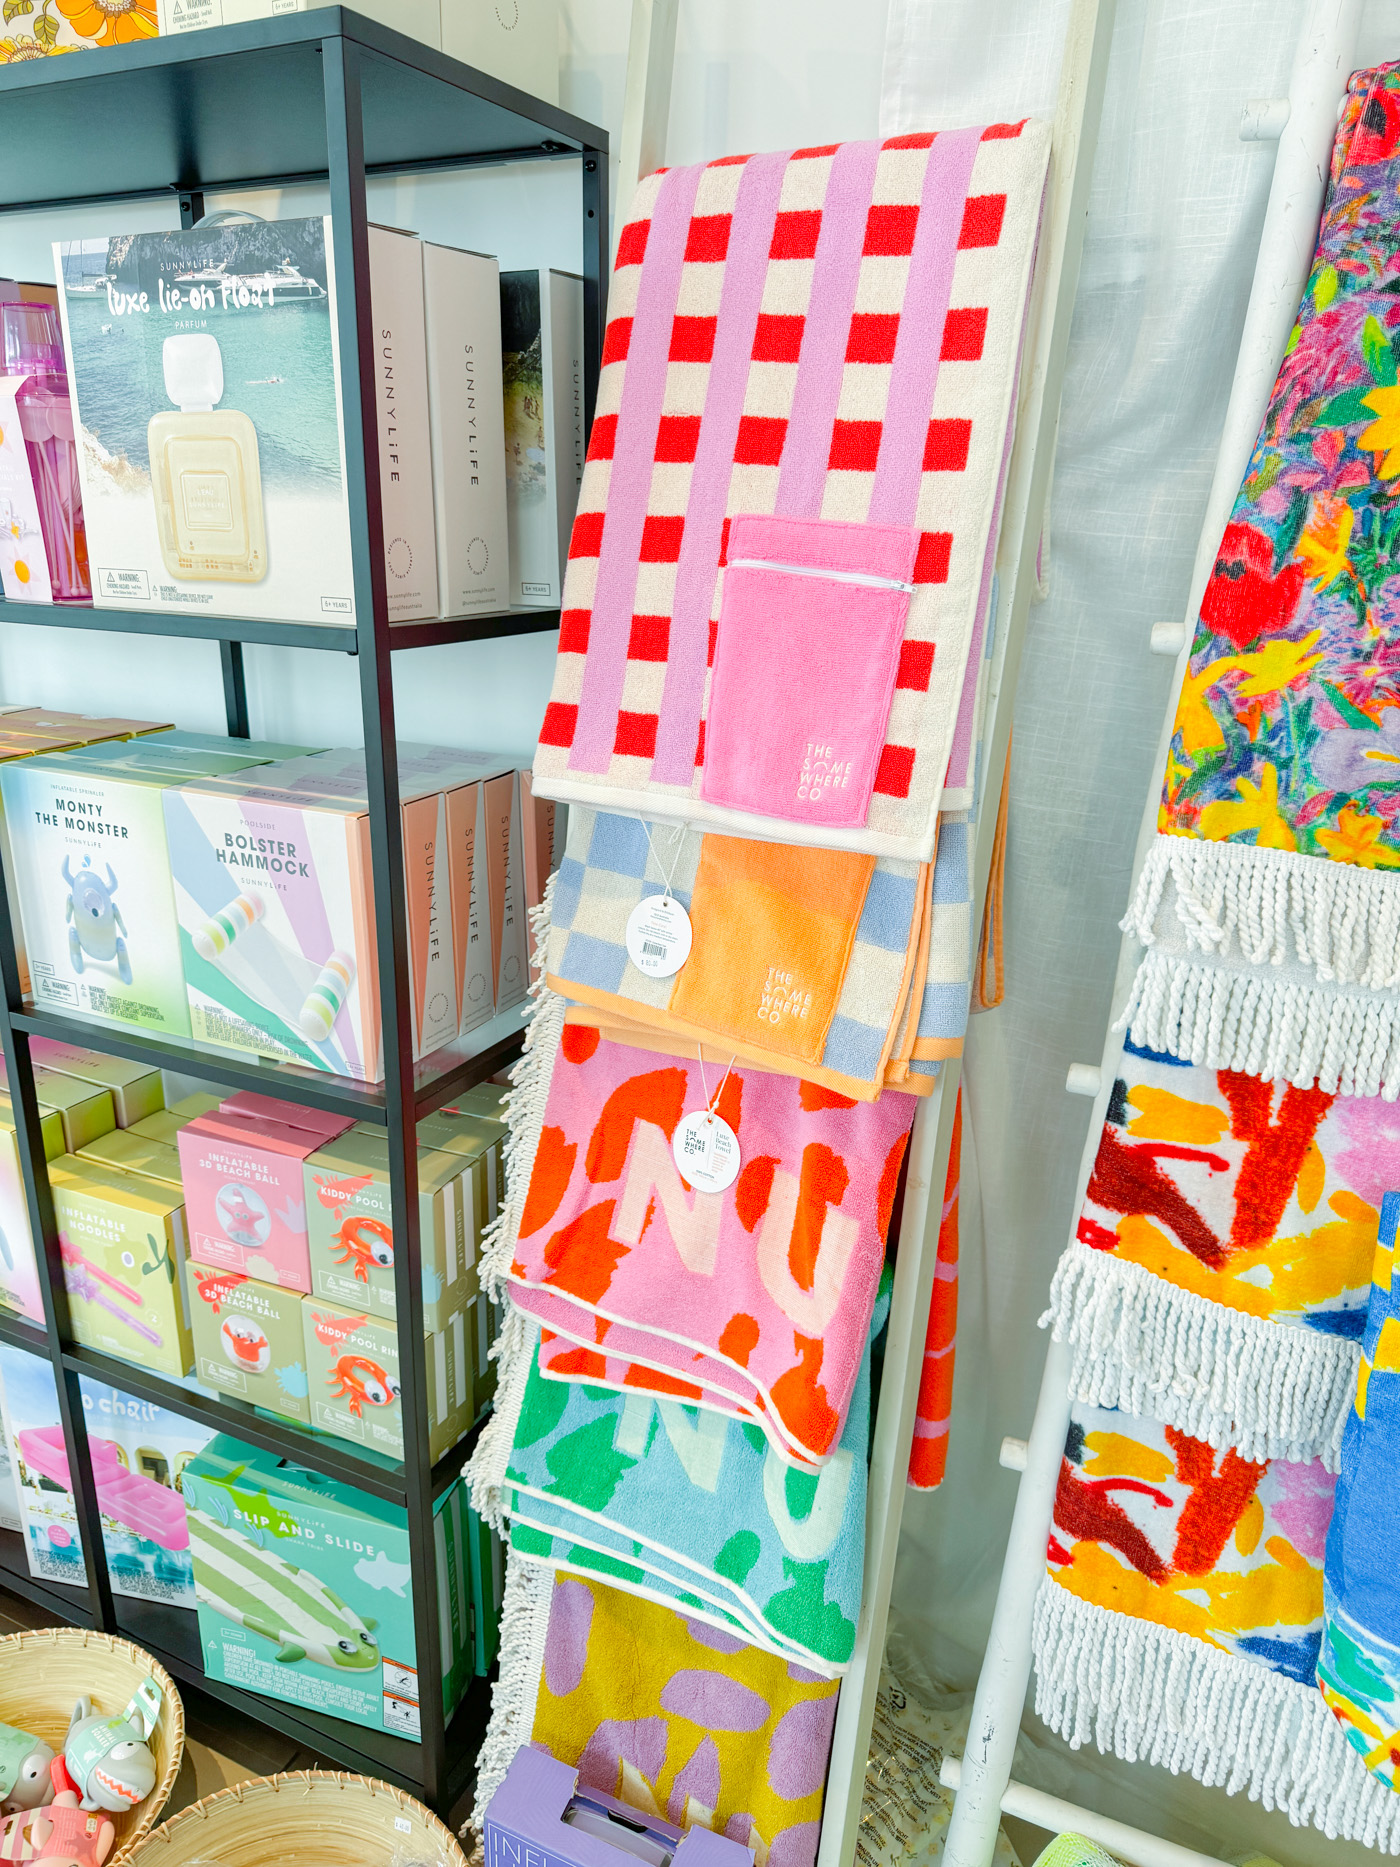 Lilly Cooper Homewares and Gifts - Manuka, Canberra